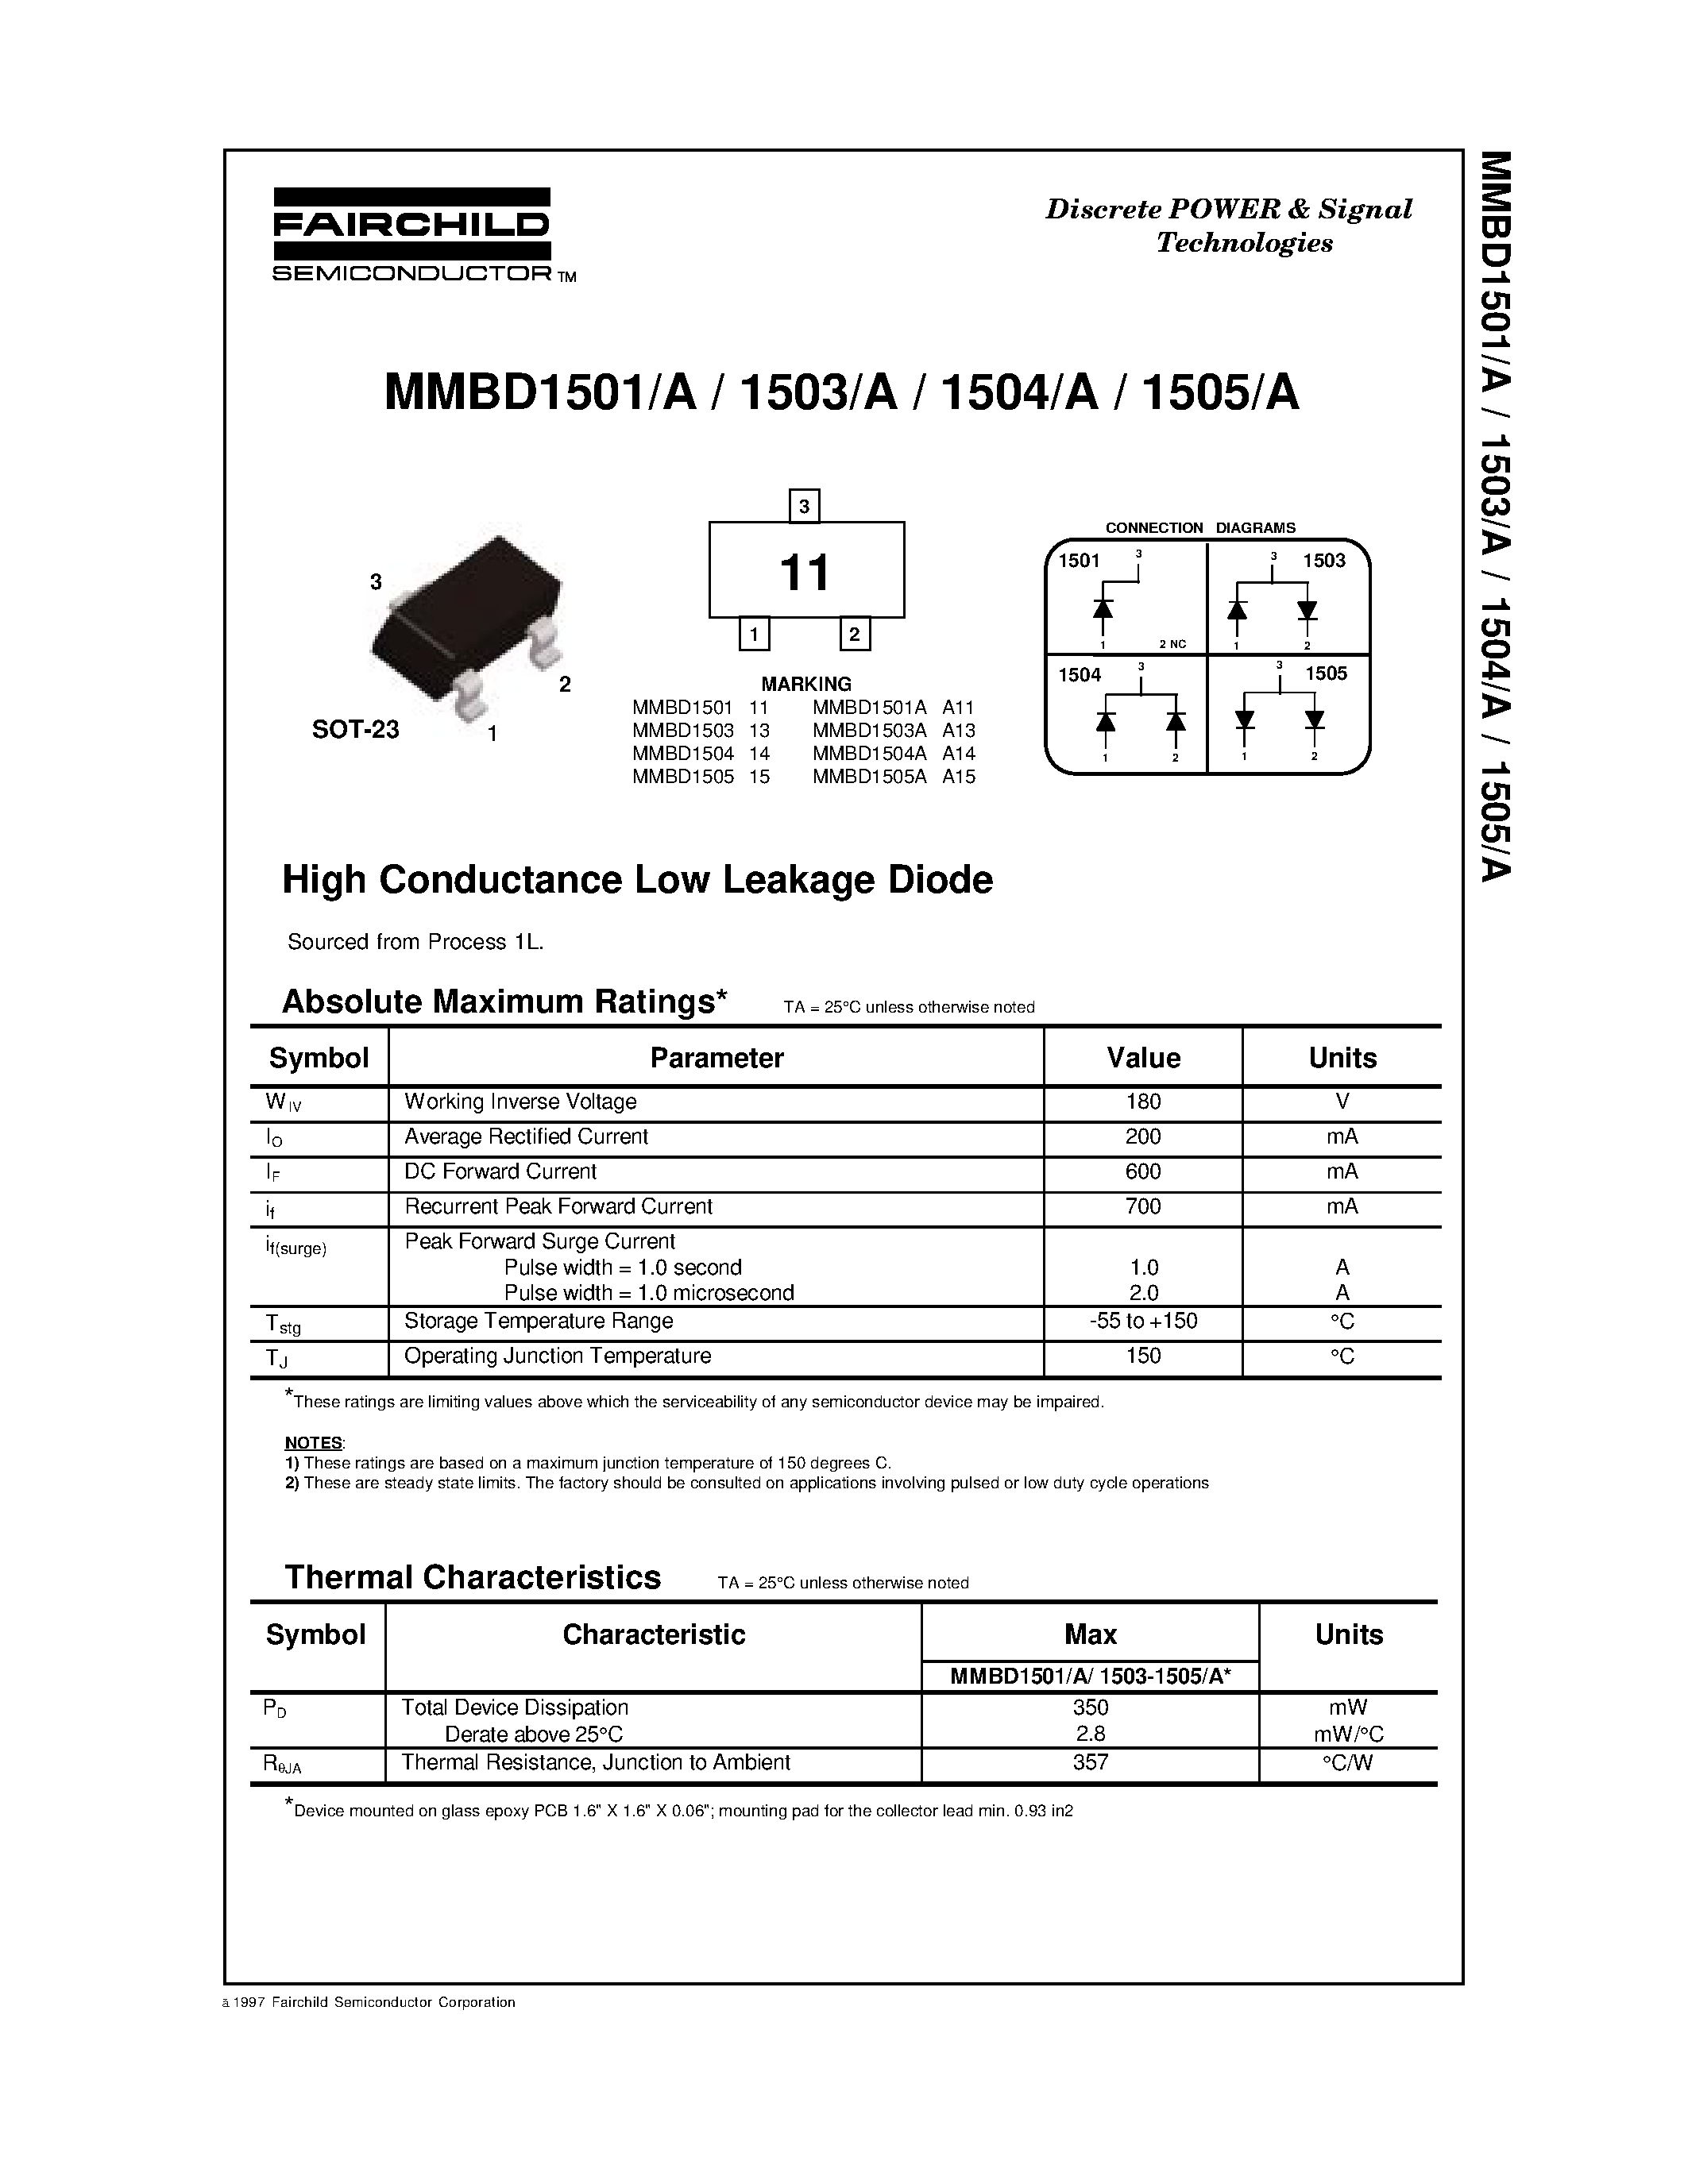 Даташит MMBD1504A - High Conductance Low Leakage Diode страница 1